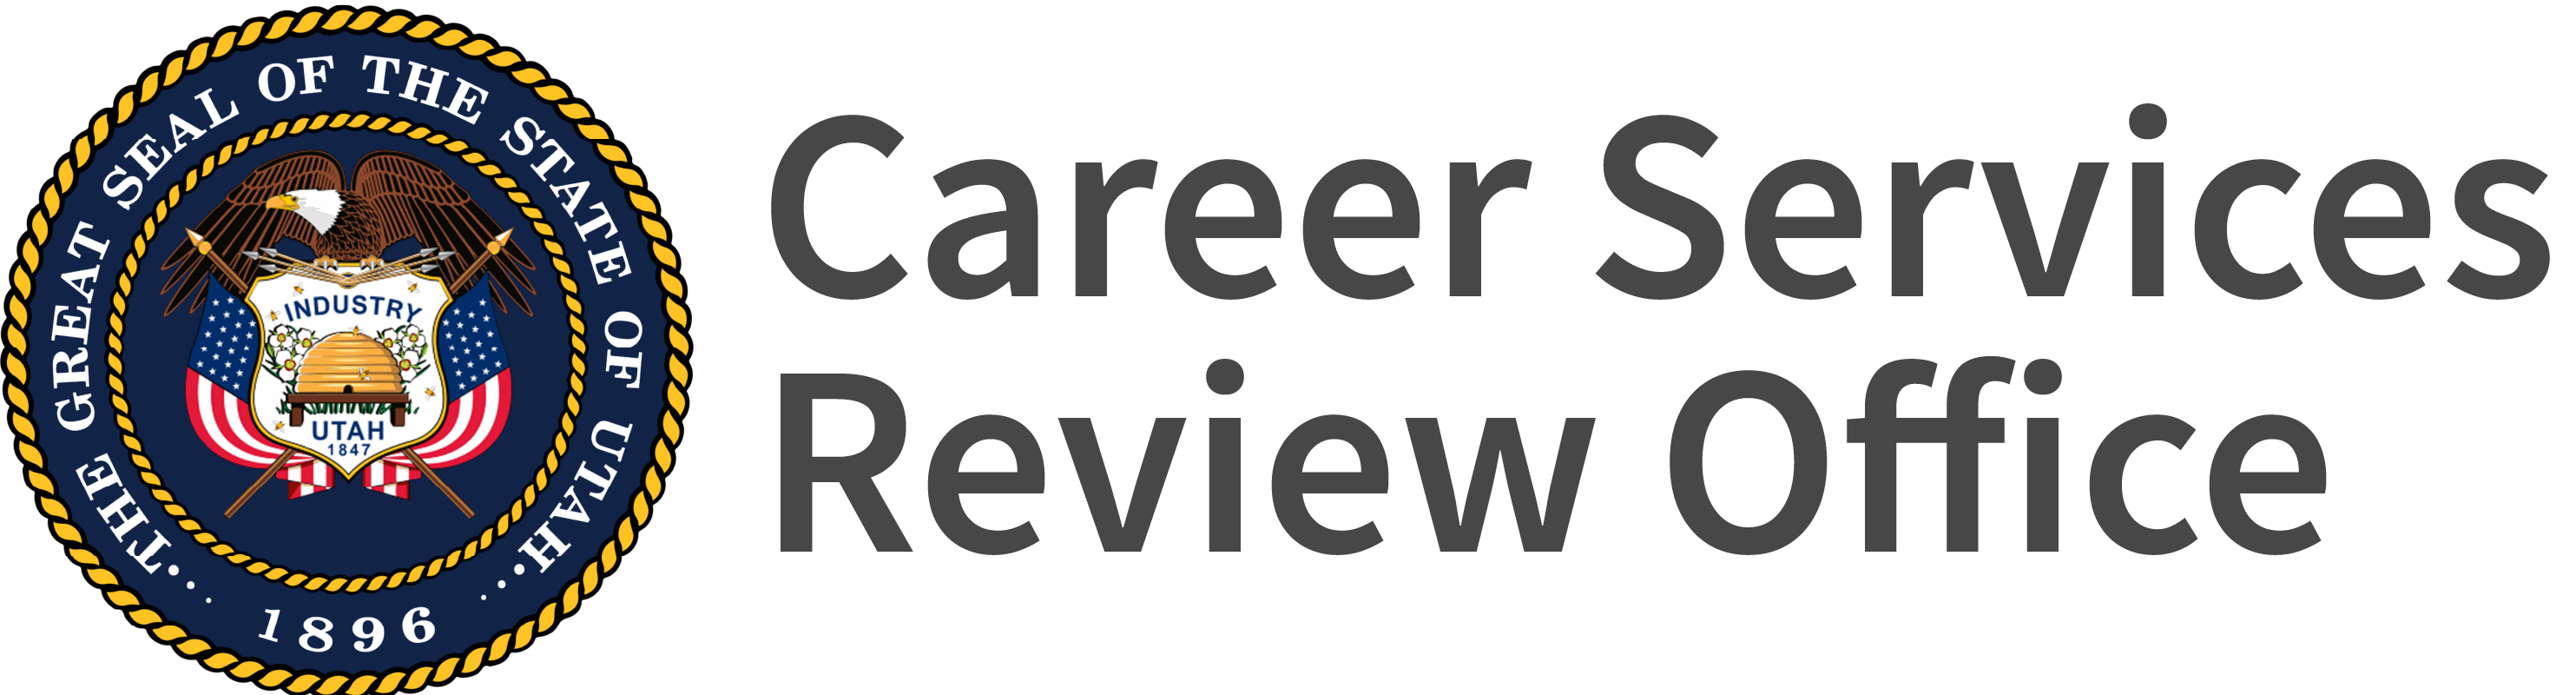 Career Services Review Office logo